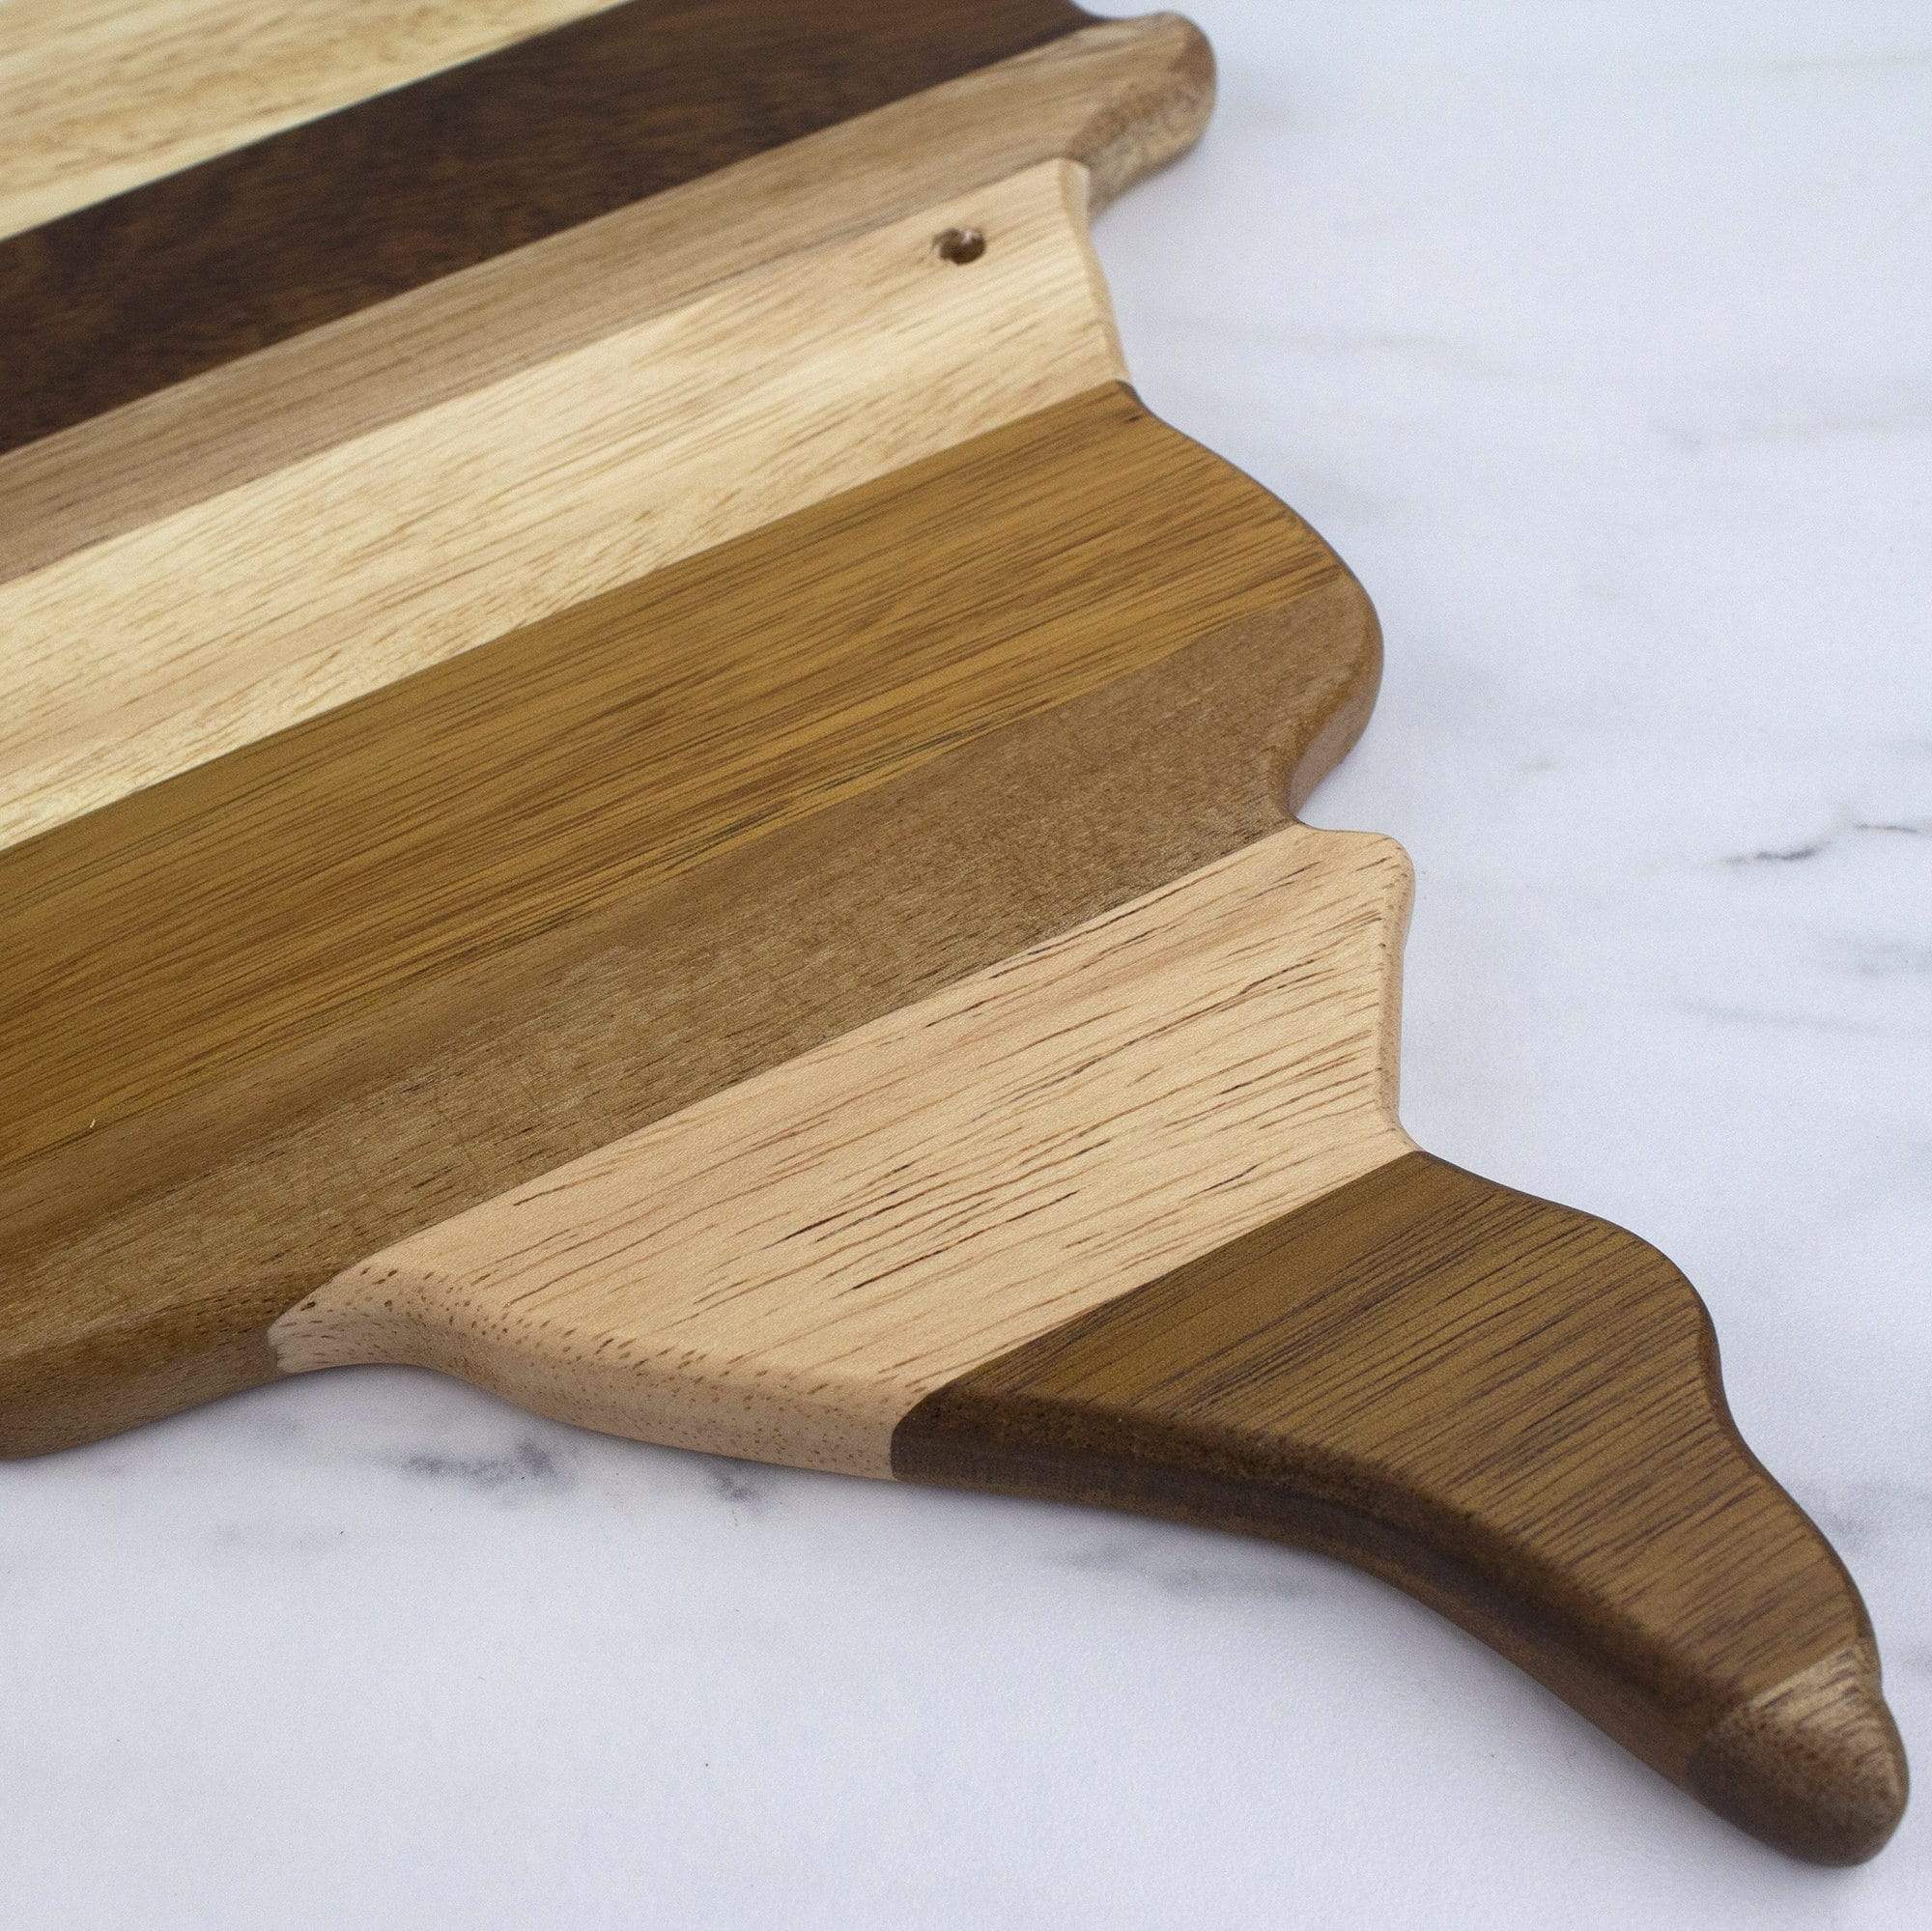 https://totallybamboo.com/cdn/shop/products/rock-branchr-shiplap-series-minnesota-state-shaped-wood-serving-and-cutting-board-totally-bamboo-628032.jpg?v=1627730022